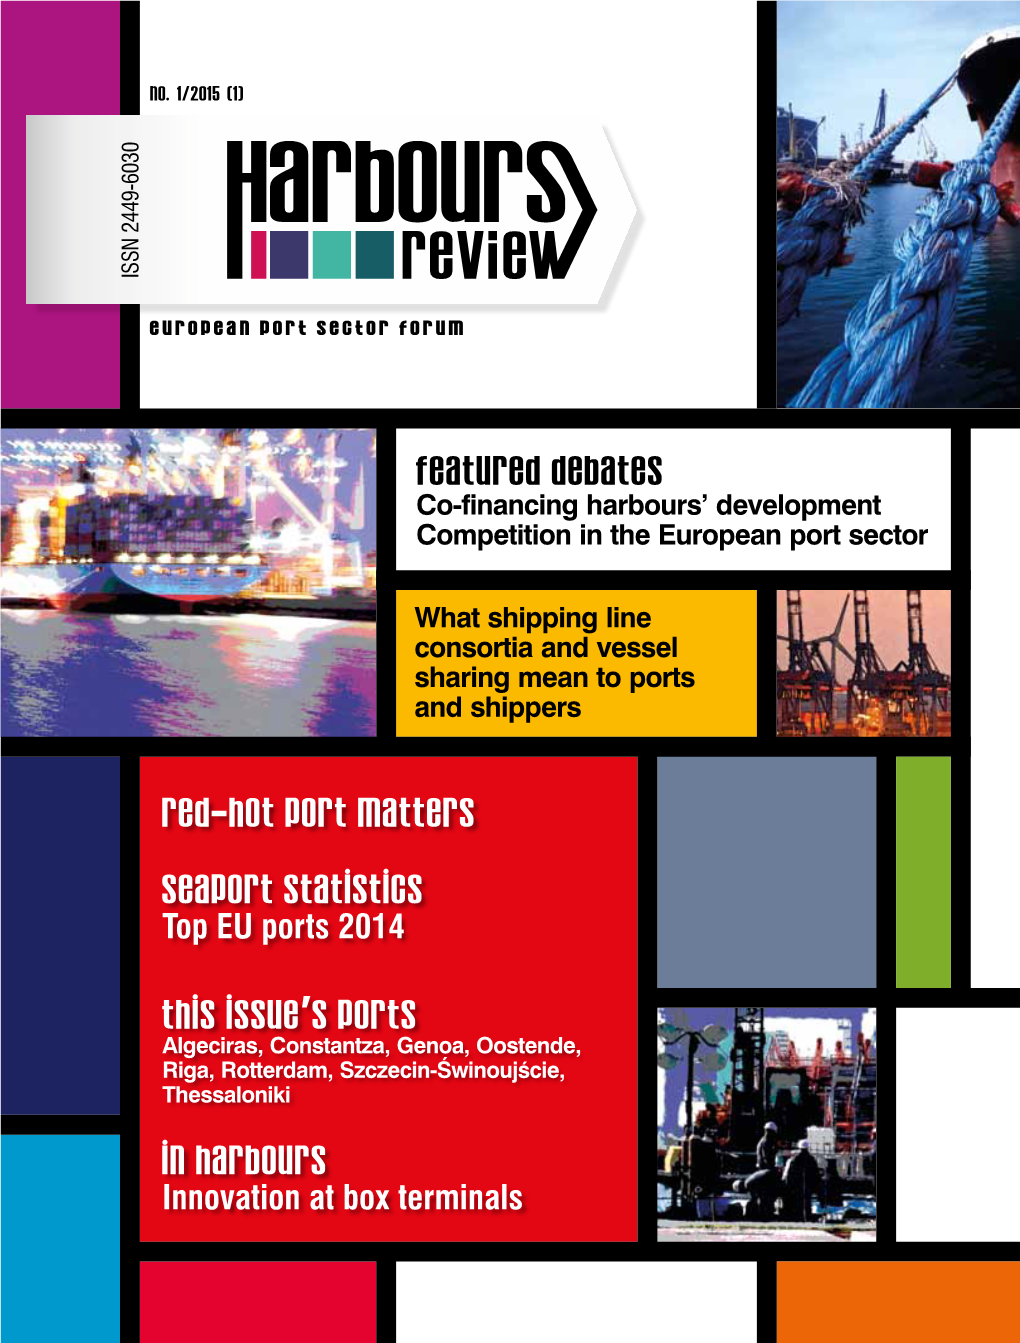 Seaport Statistics in Harbours Featured Debates This Issue's Ports Red-Hot Port Matters